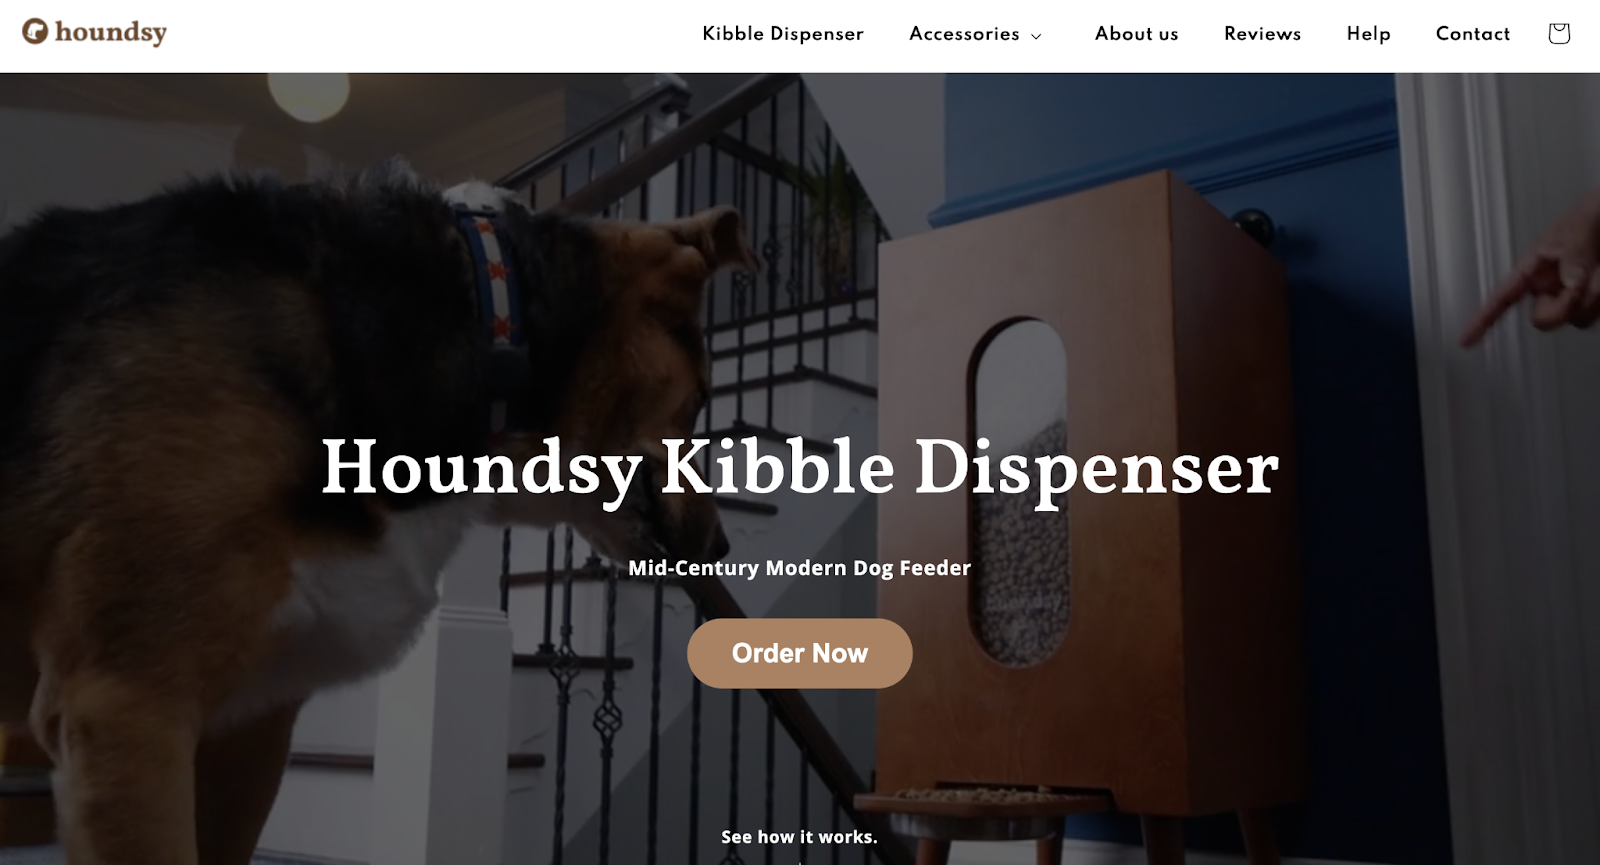 single product website example: Houndsy